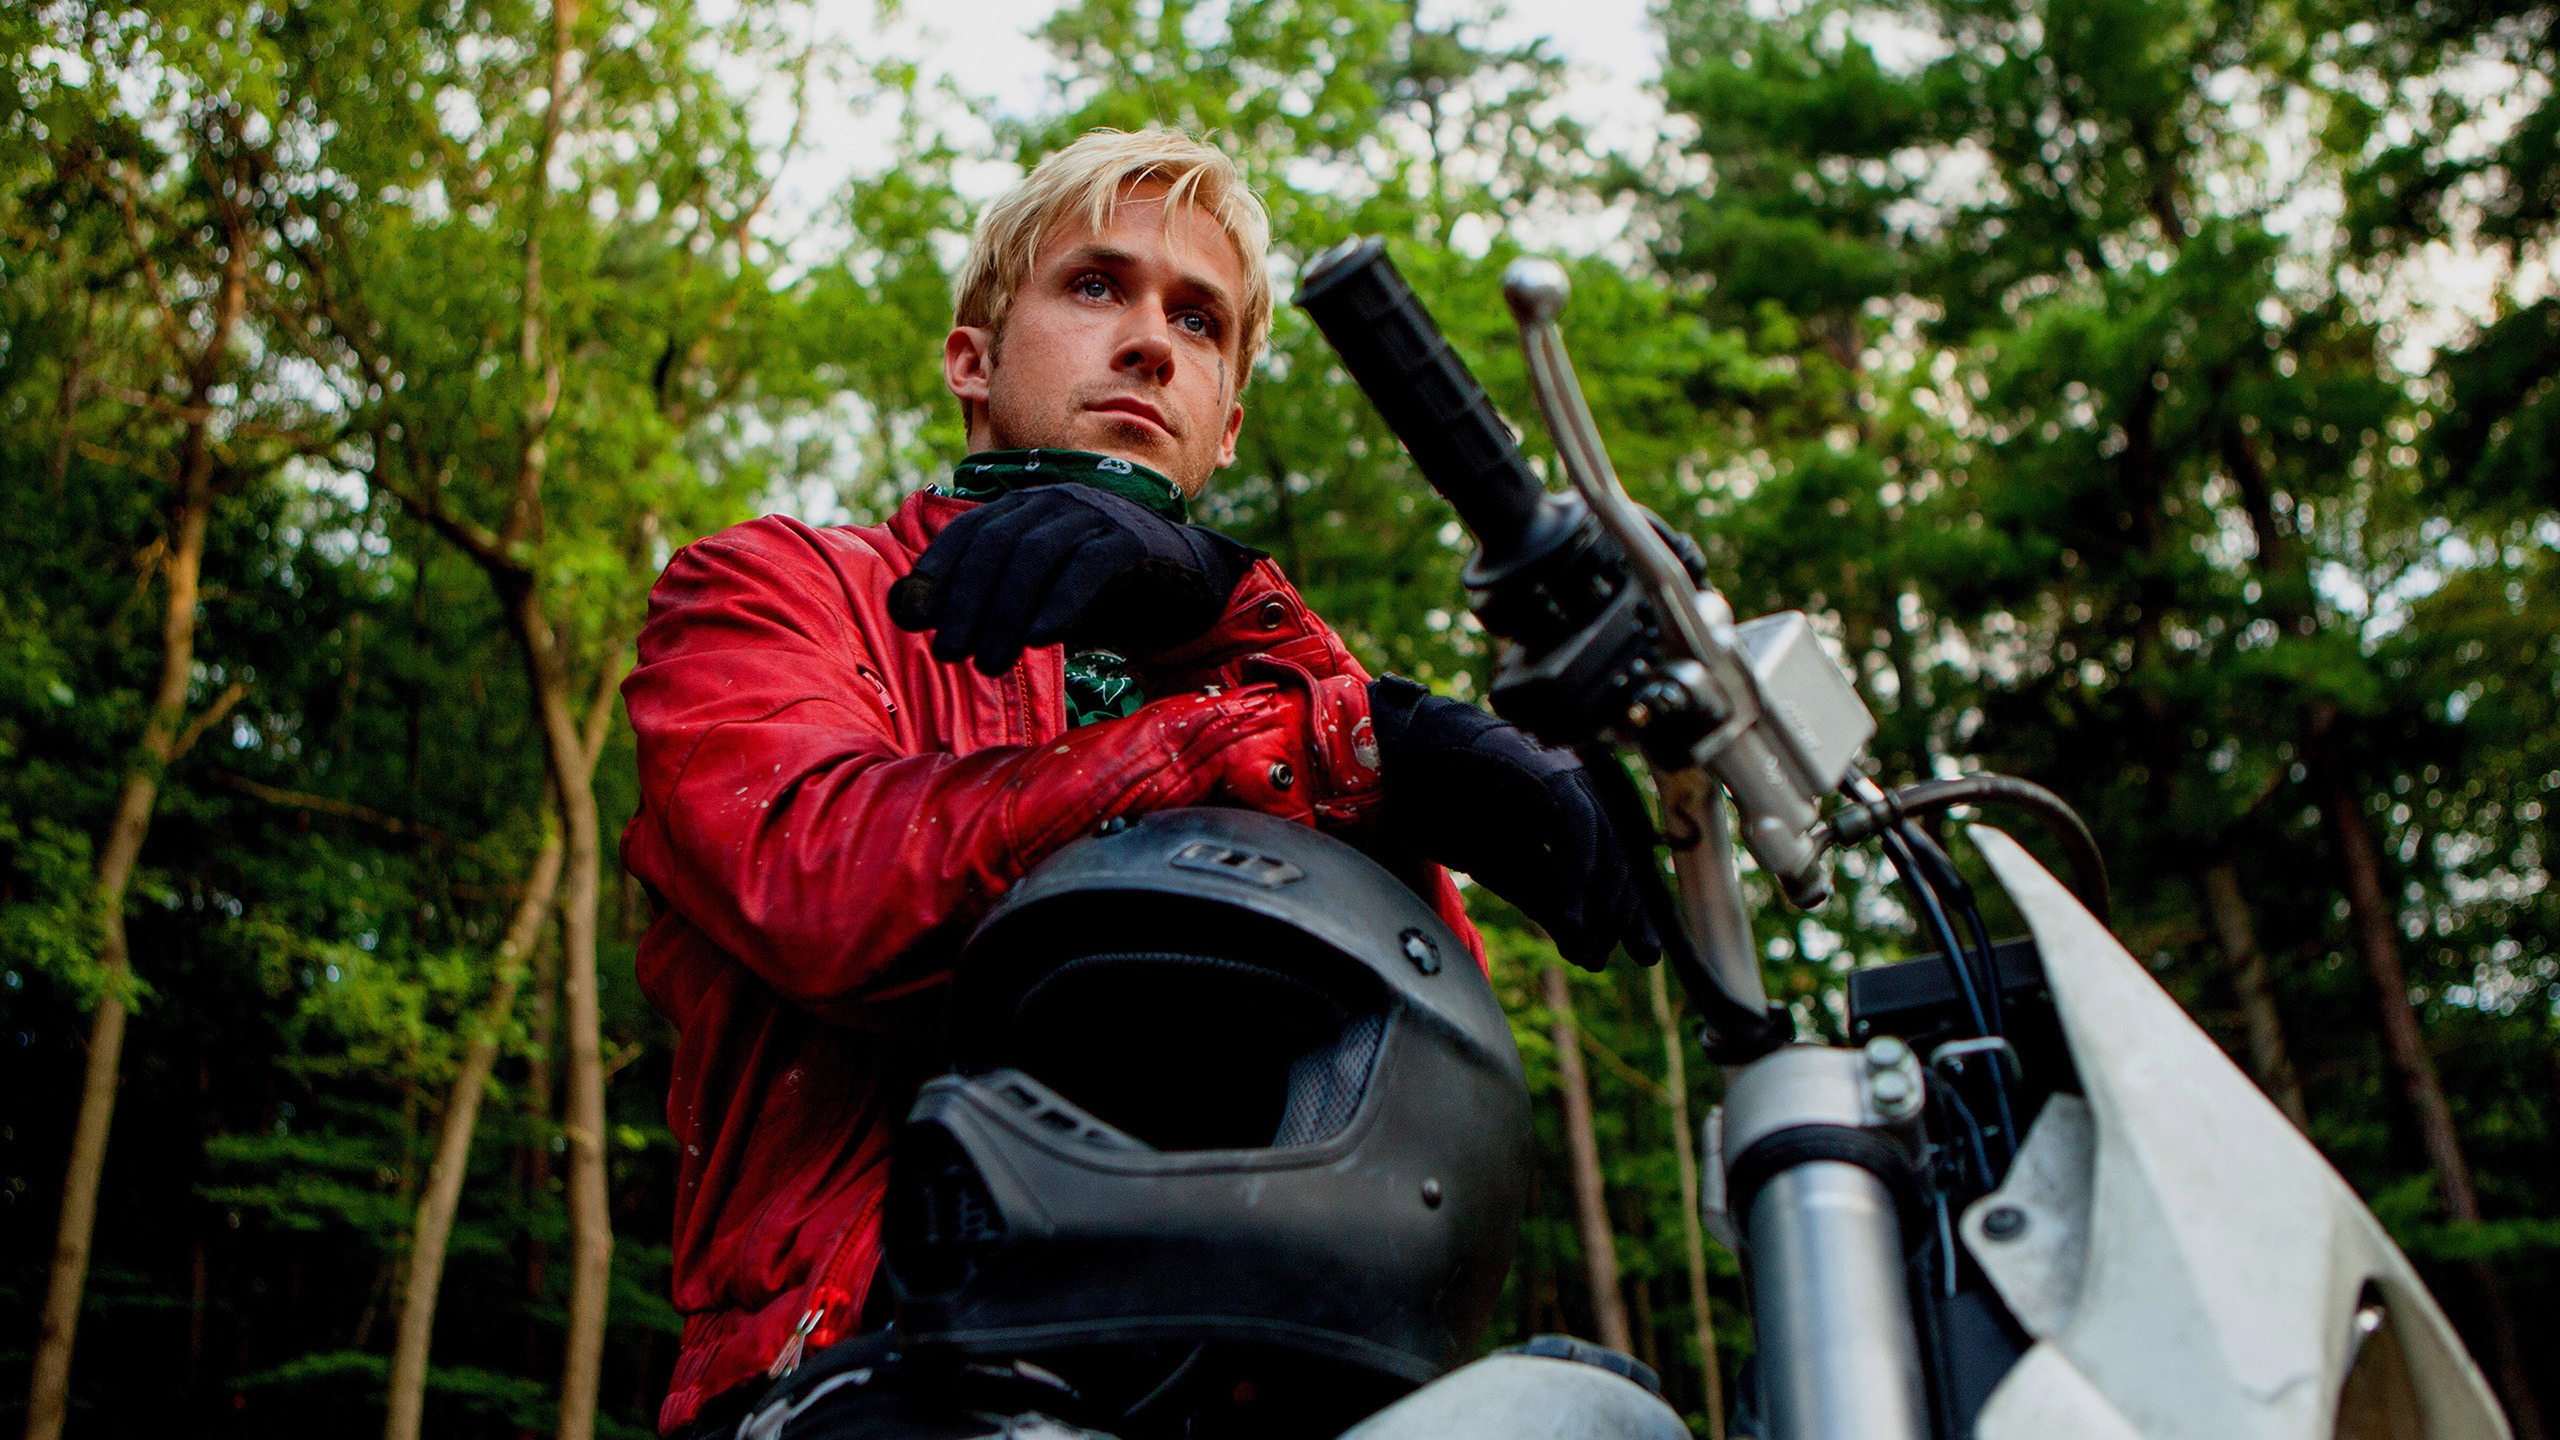 The Place Beyond the Pines for 2560x1440 HDTV resolution